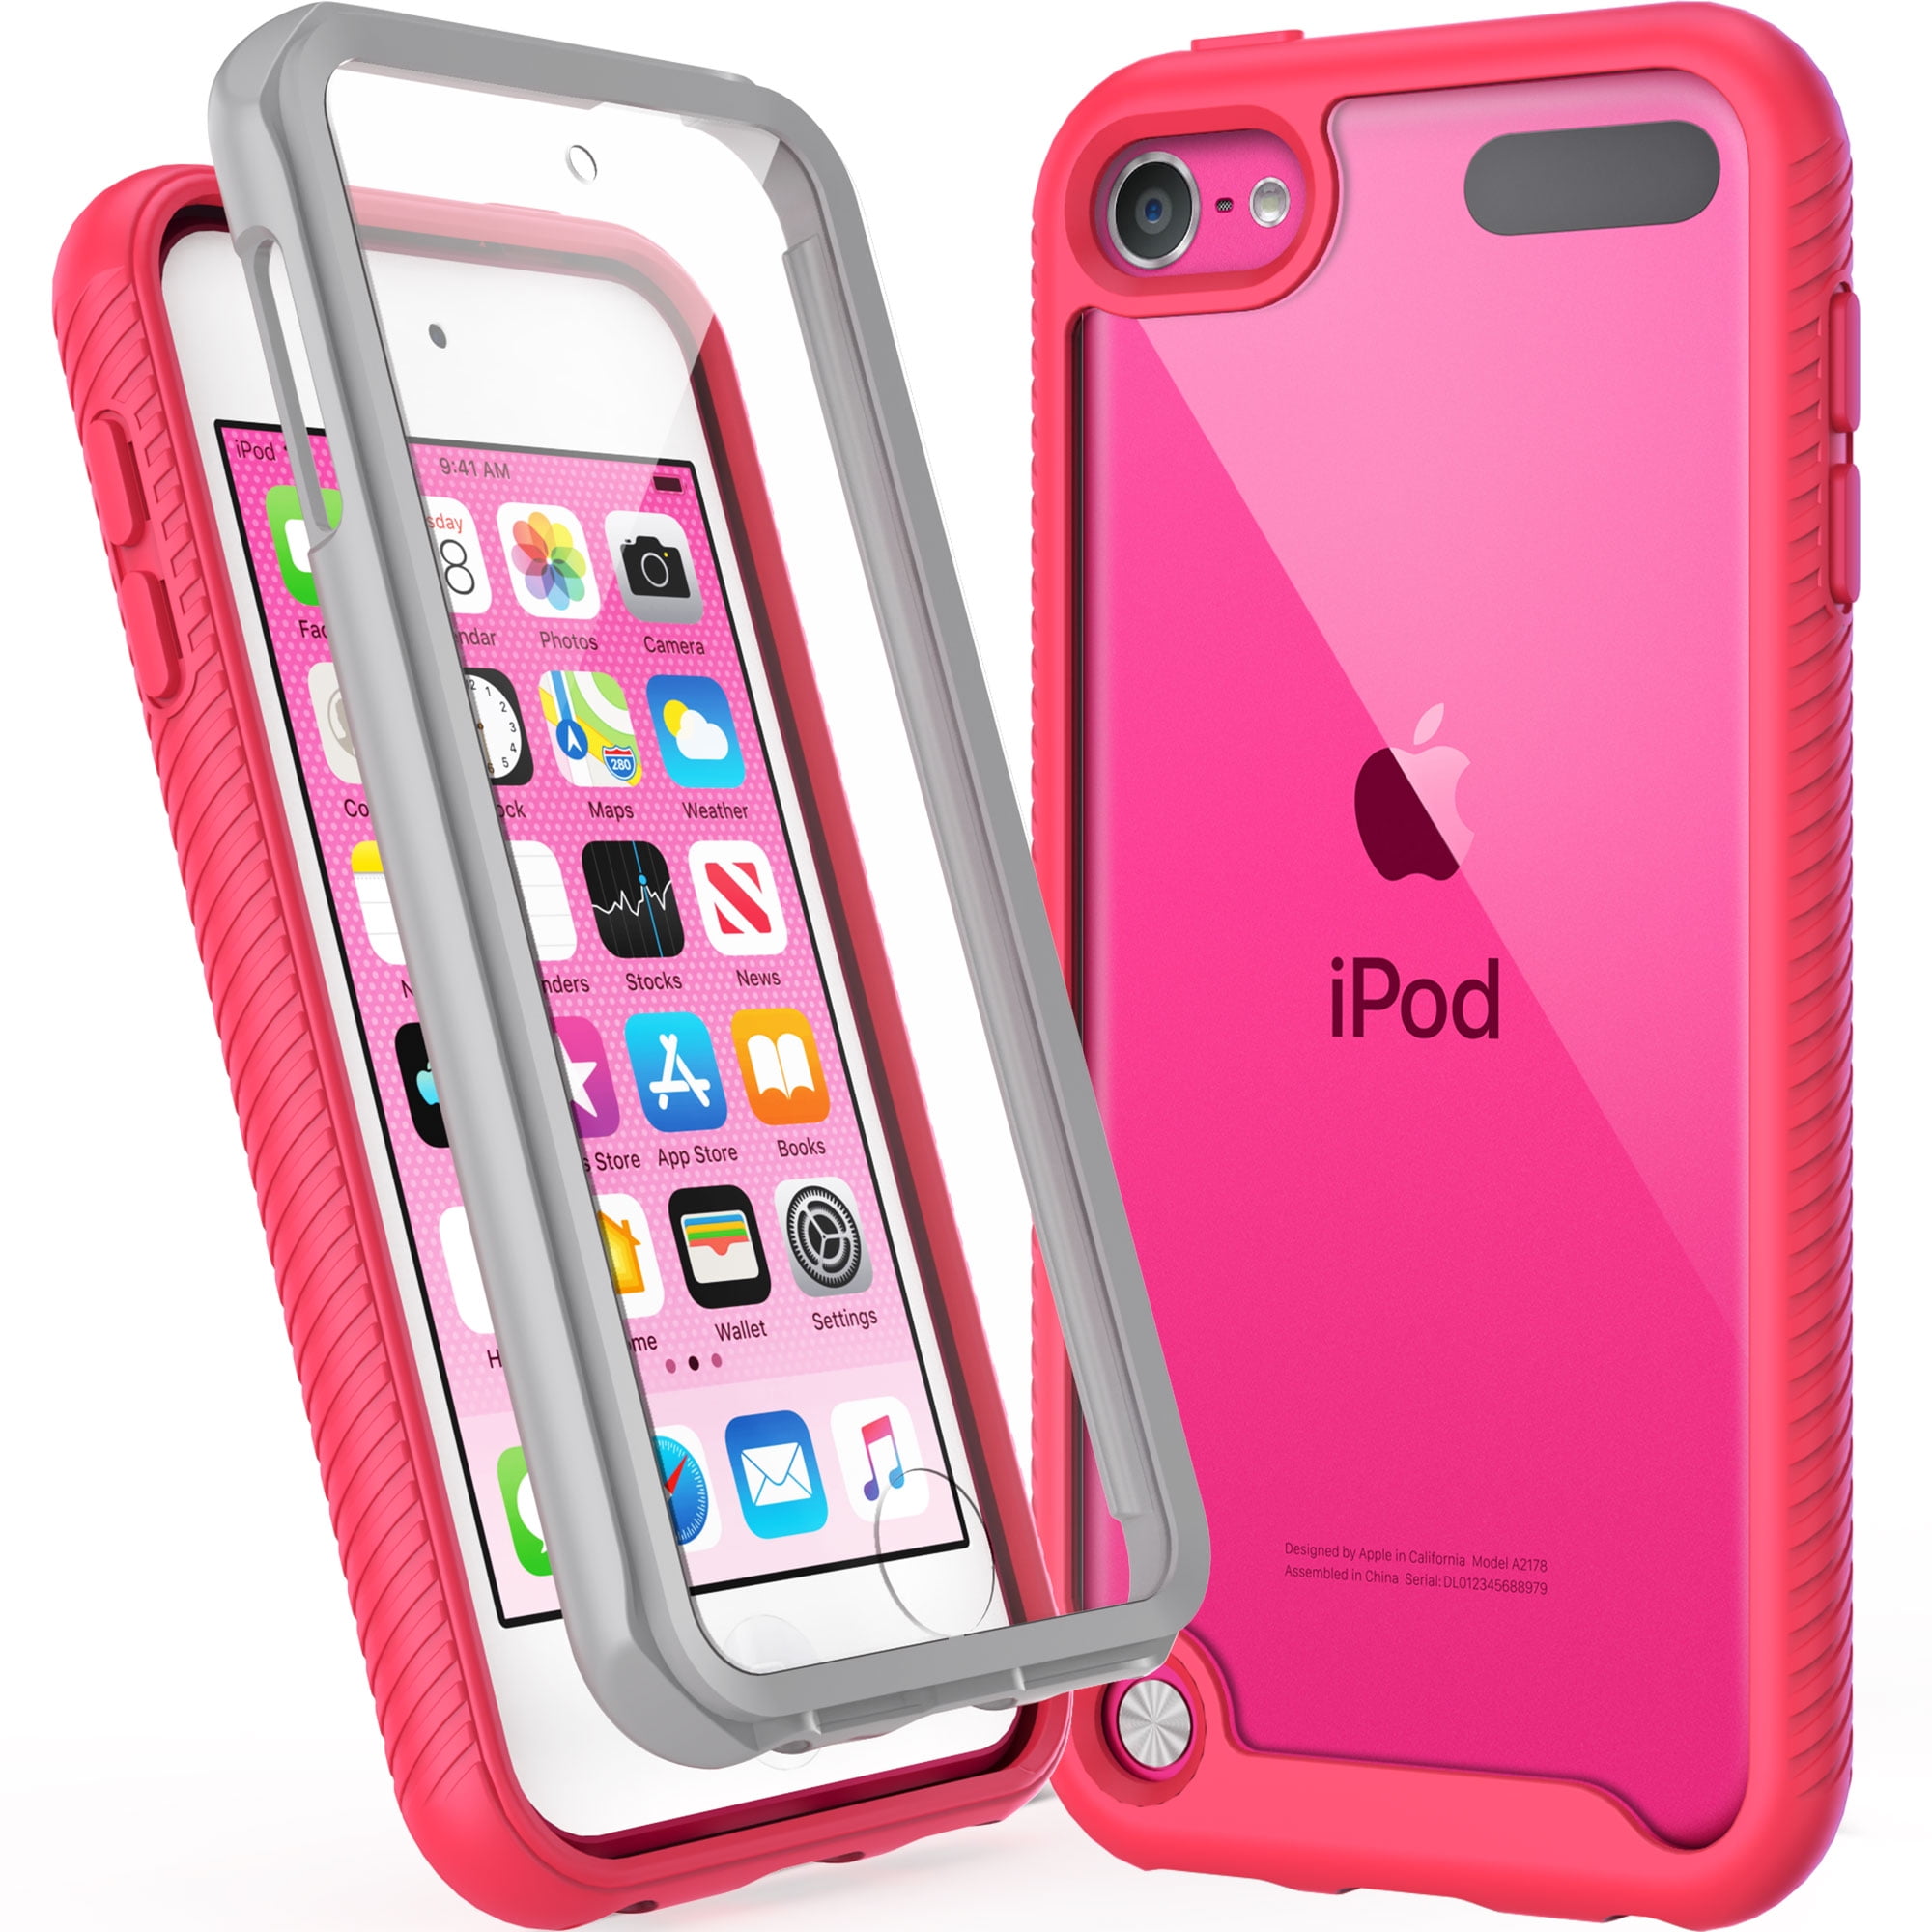 with Precise Cutouts & Raised Edges Slim Clear Soft TPU Case for iPod Touch 7th Gen/6th Gen Crystal Clear ESR Essential Zero Case for iPod Touch 7/iPod Touch 6 